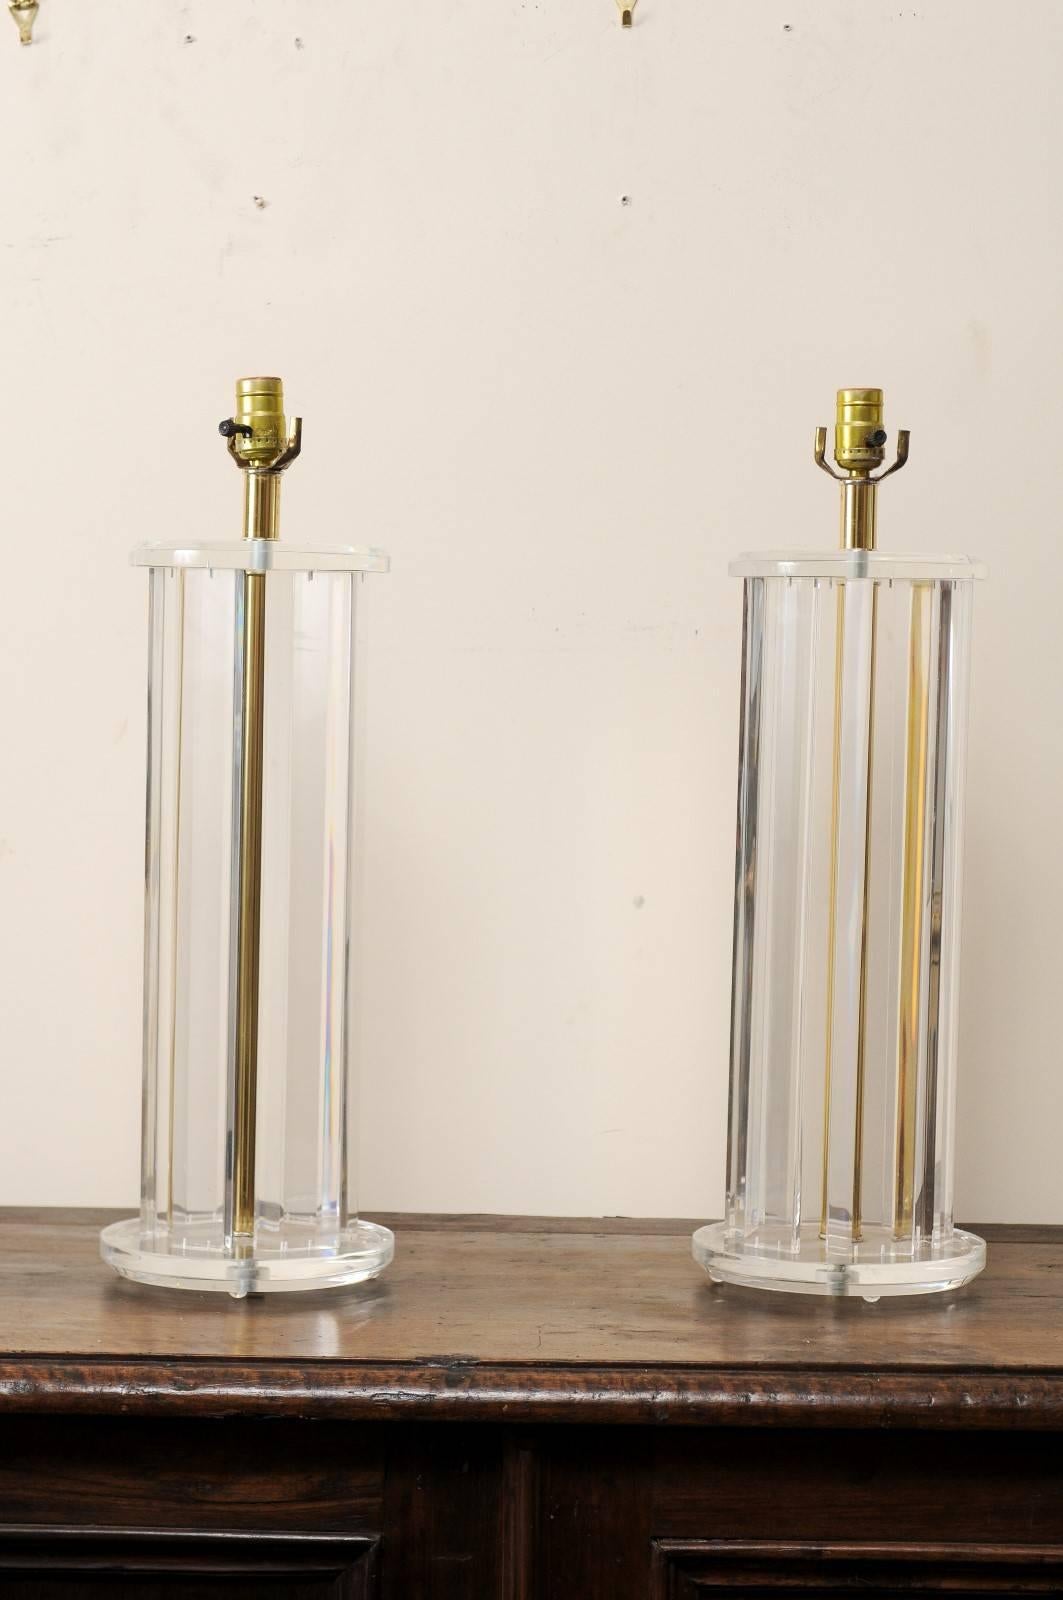 American Pair of Lucite Mid-20th Century Table Lamps with Round Shape and Gold Tones